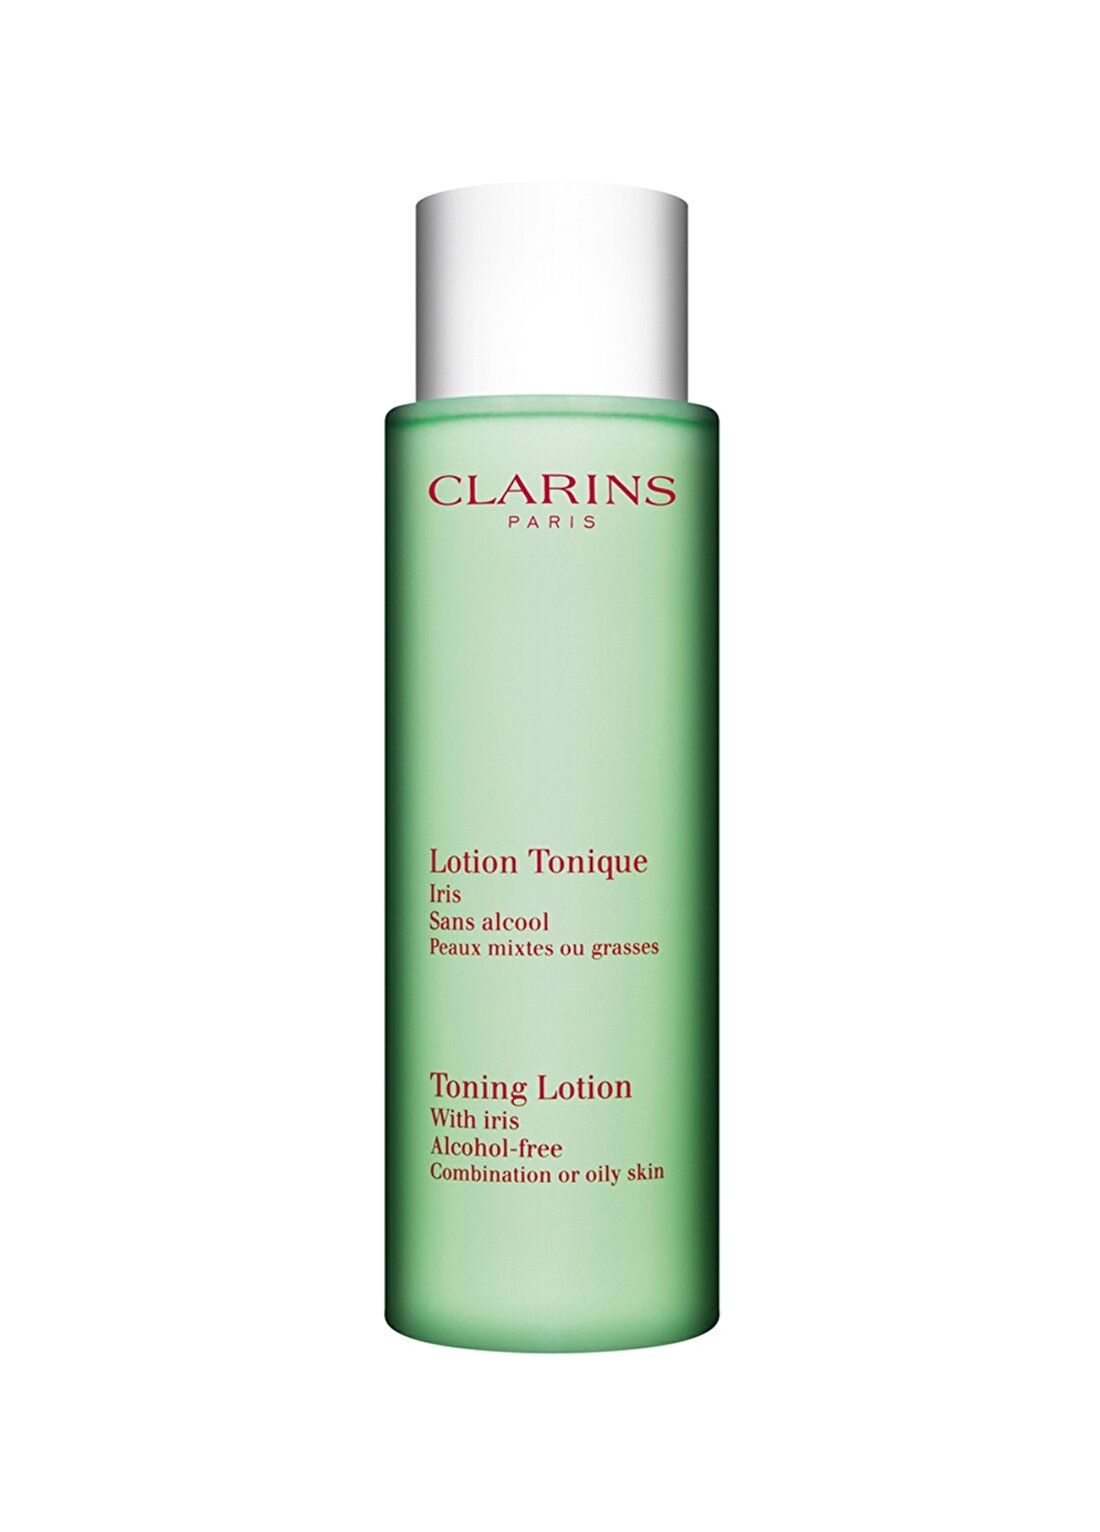 Clarins Toning Lotion Combination Or Oily Skin Tonik